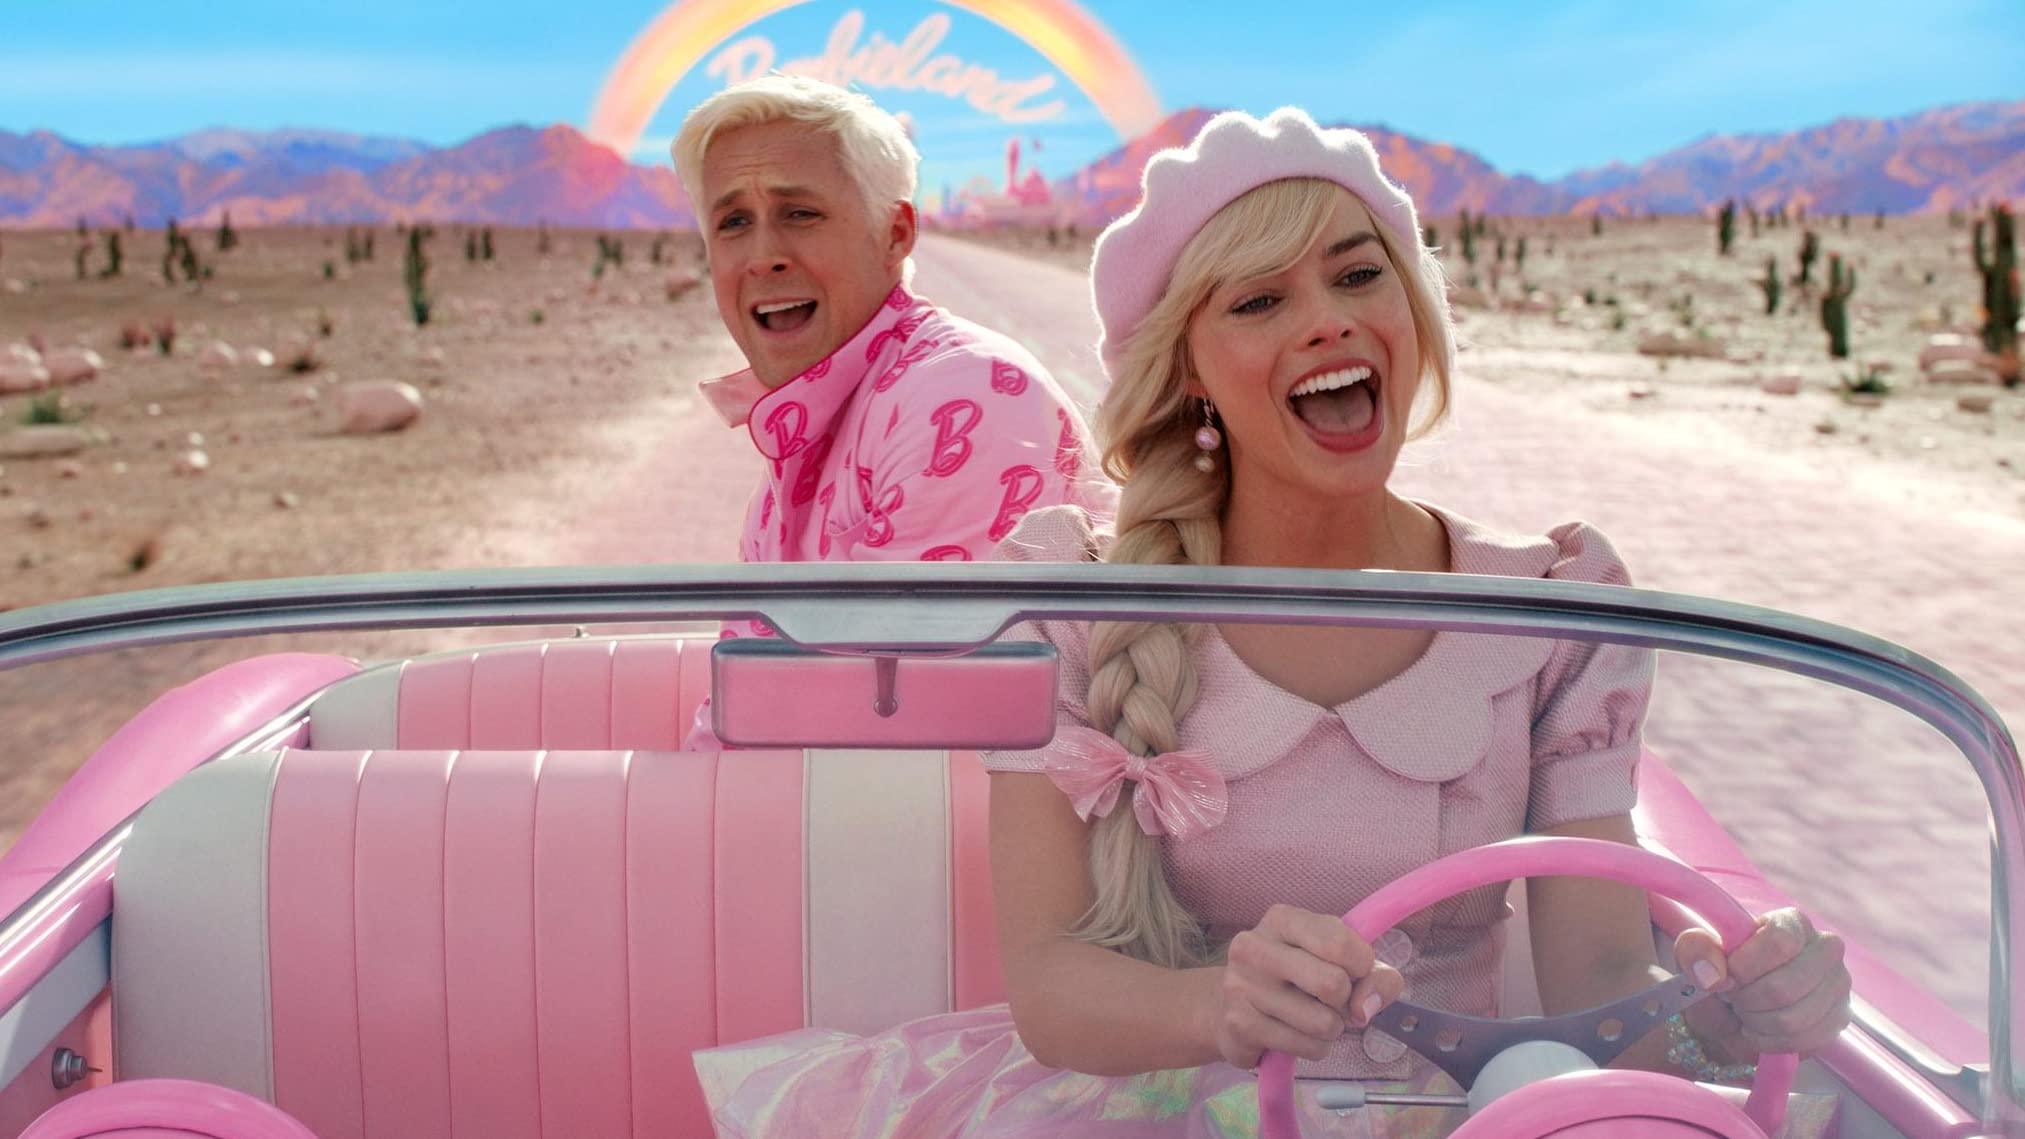 Barbie (September 12) - Streaming on Prime VideoPrepare to be dazzled as Margot Robbie and Ryan Gosling bring Barbie and Ken to life in the fantastical realm of 